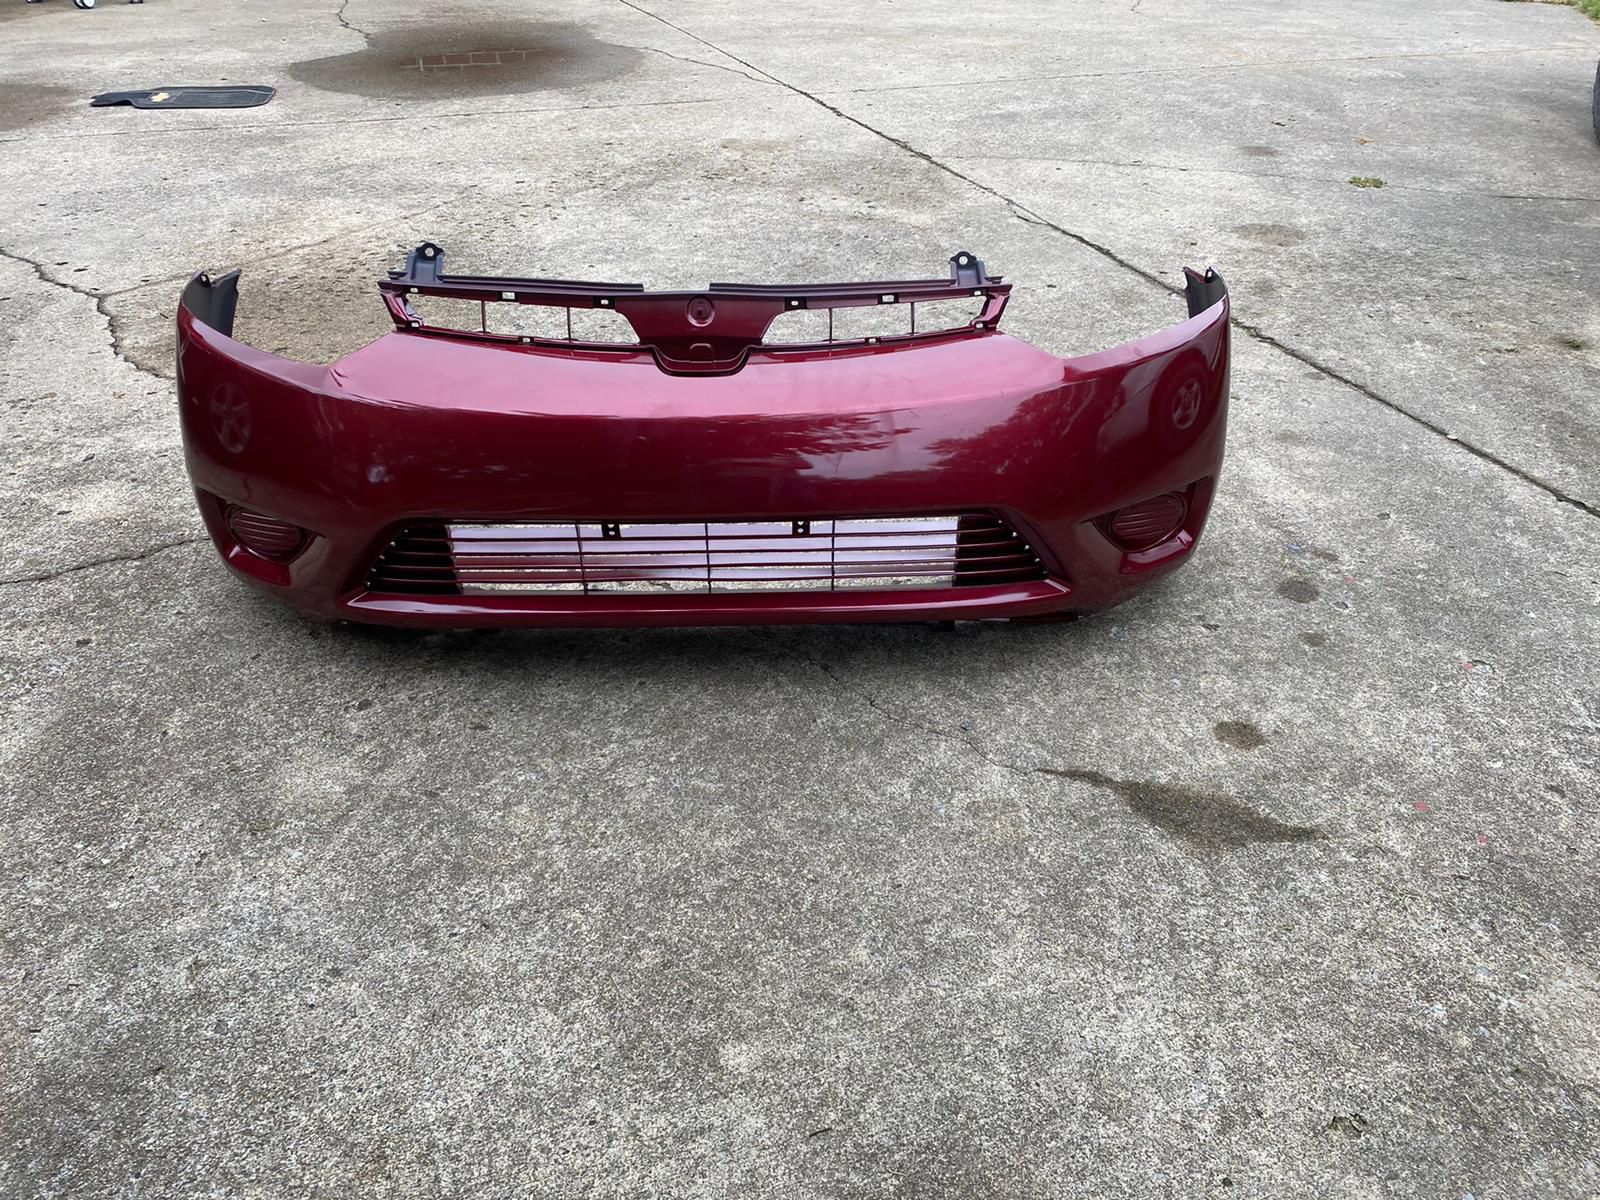 NEW FRONT BUMPER FOR HONDA CIVIC 2 DOORS 2007 AND UP 